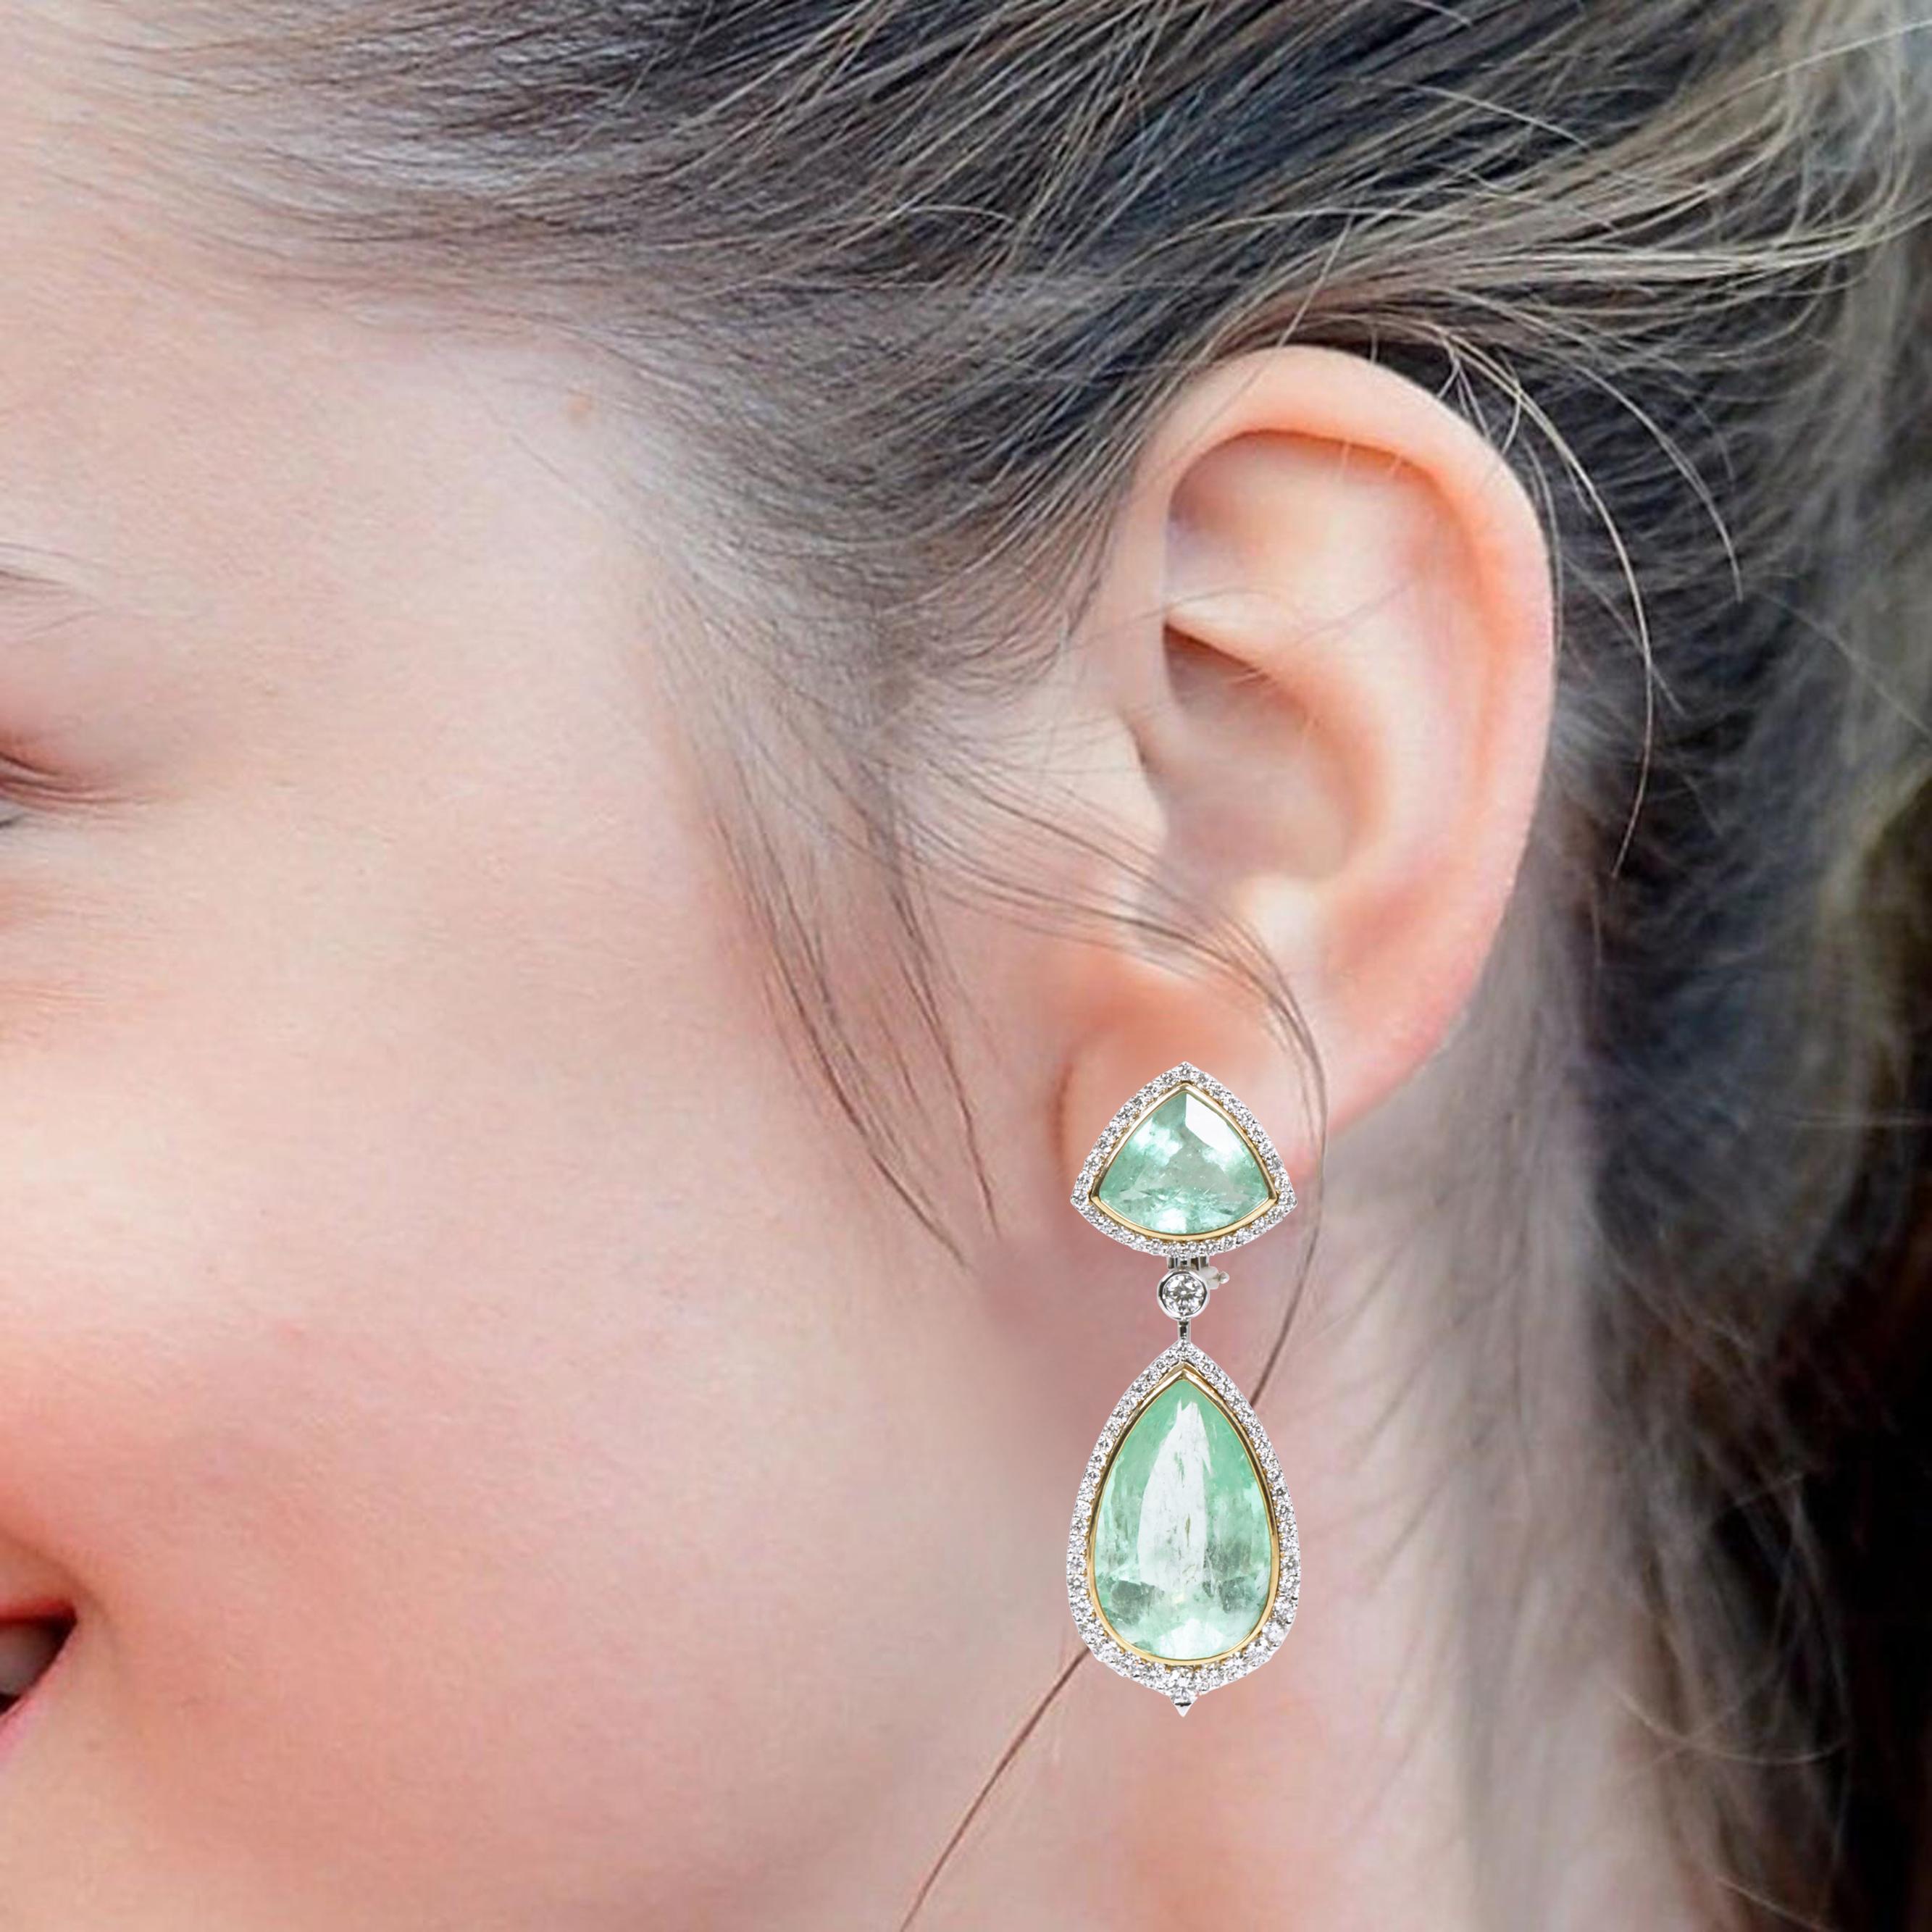 18 Karat Gold 43.72 Carat Natural Colombian Emerald and Diamond Cocktail Drop Earrings

This gorgeous solitaire Colombian green emeralds and diamond dangle earring is fascinating. The bottom is amicably formed with solitaire pear-shaped emerald in